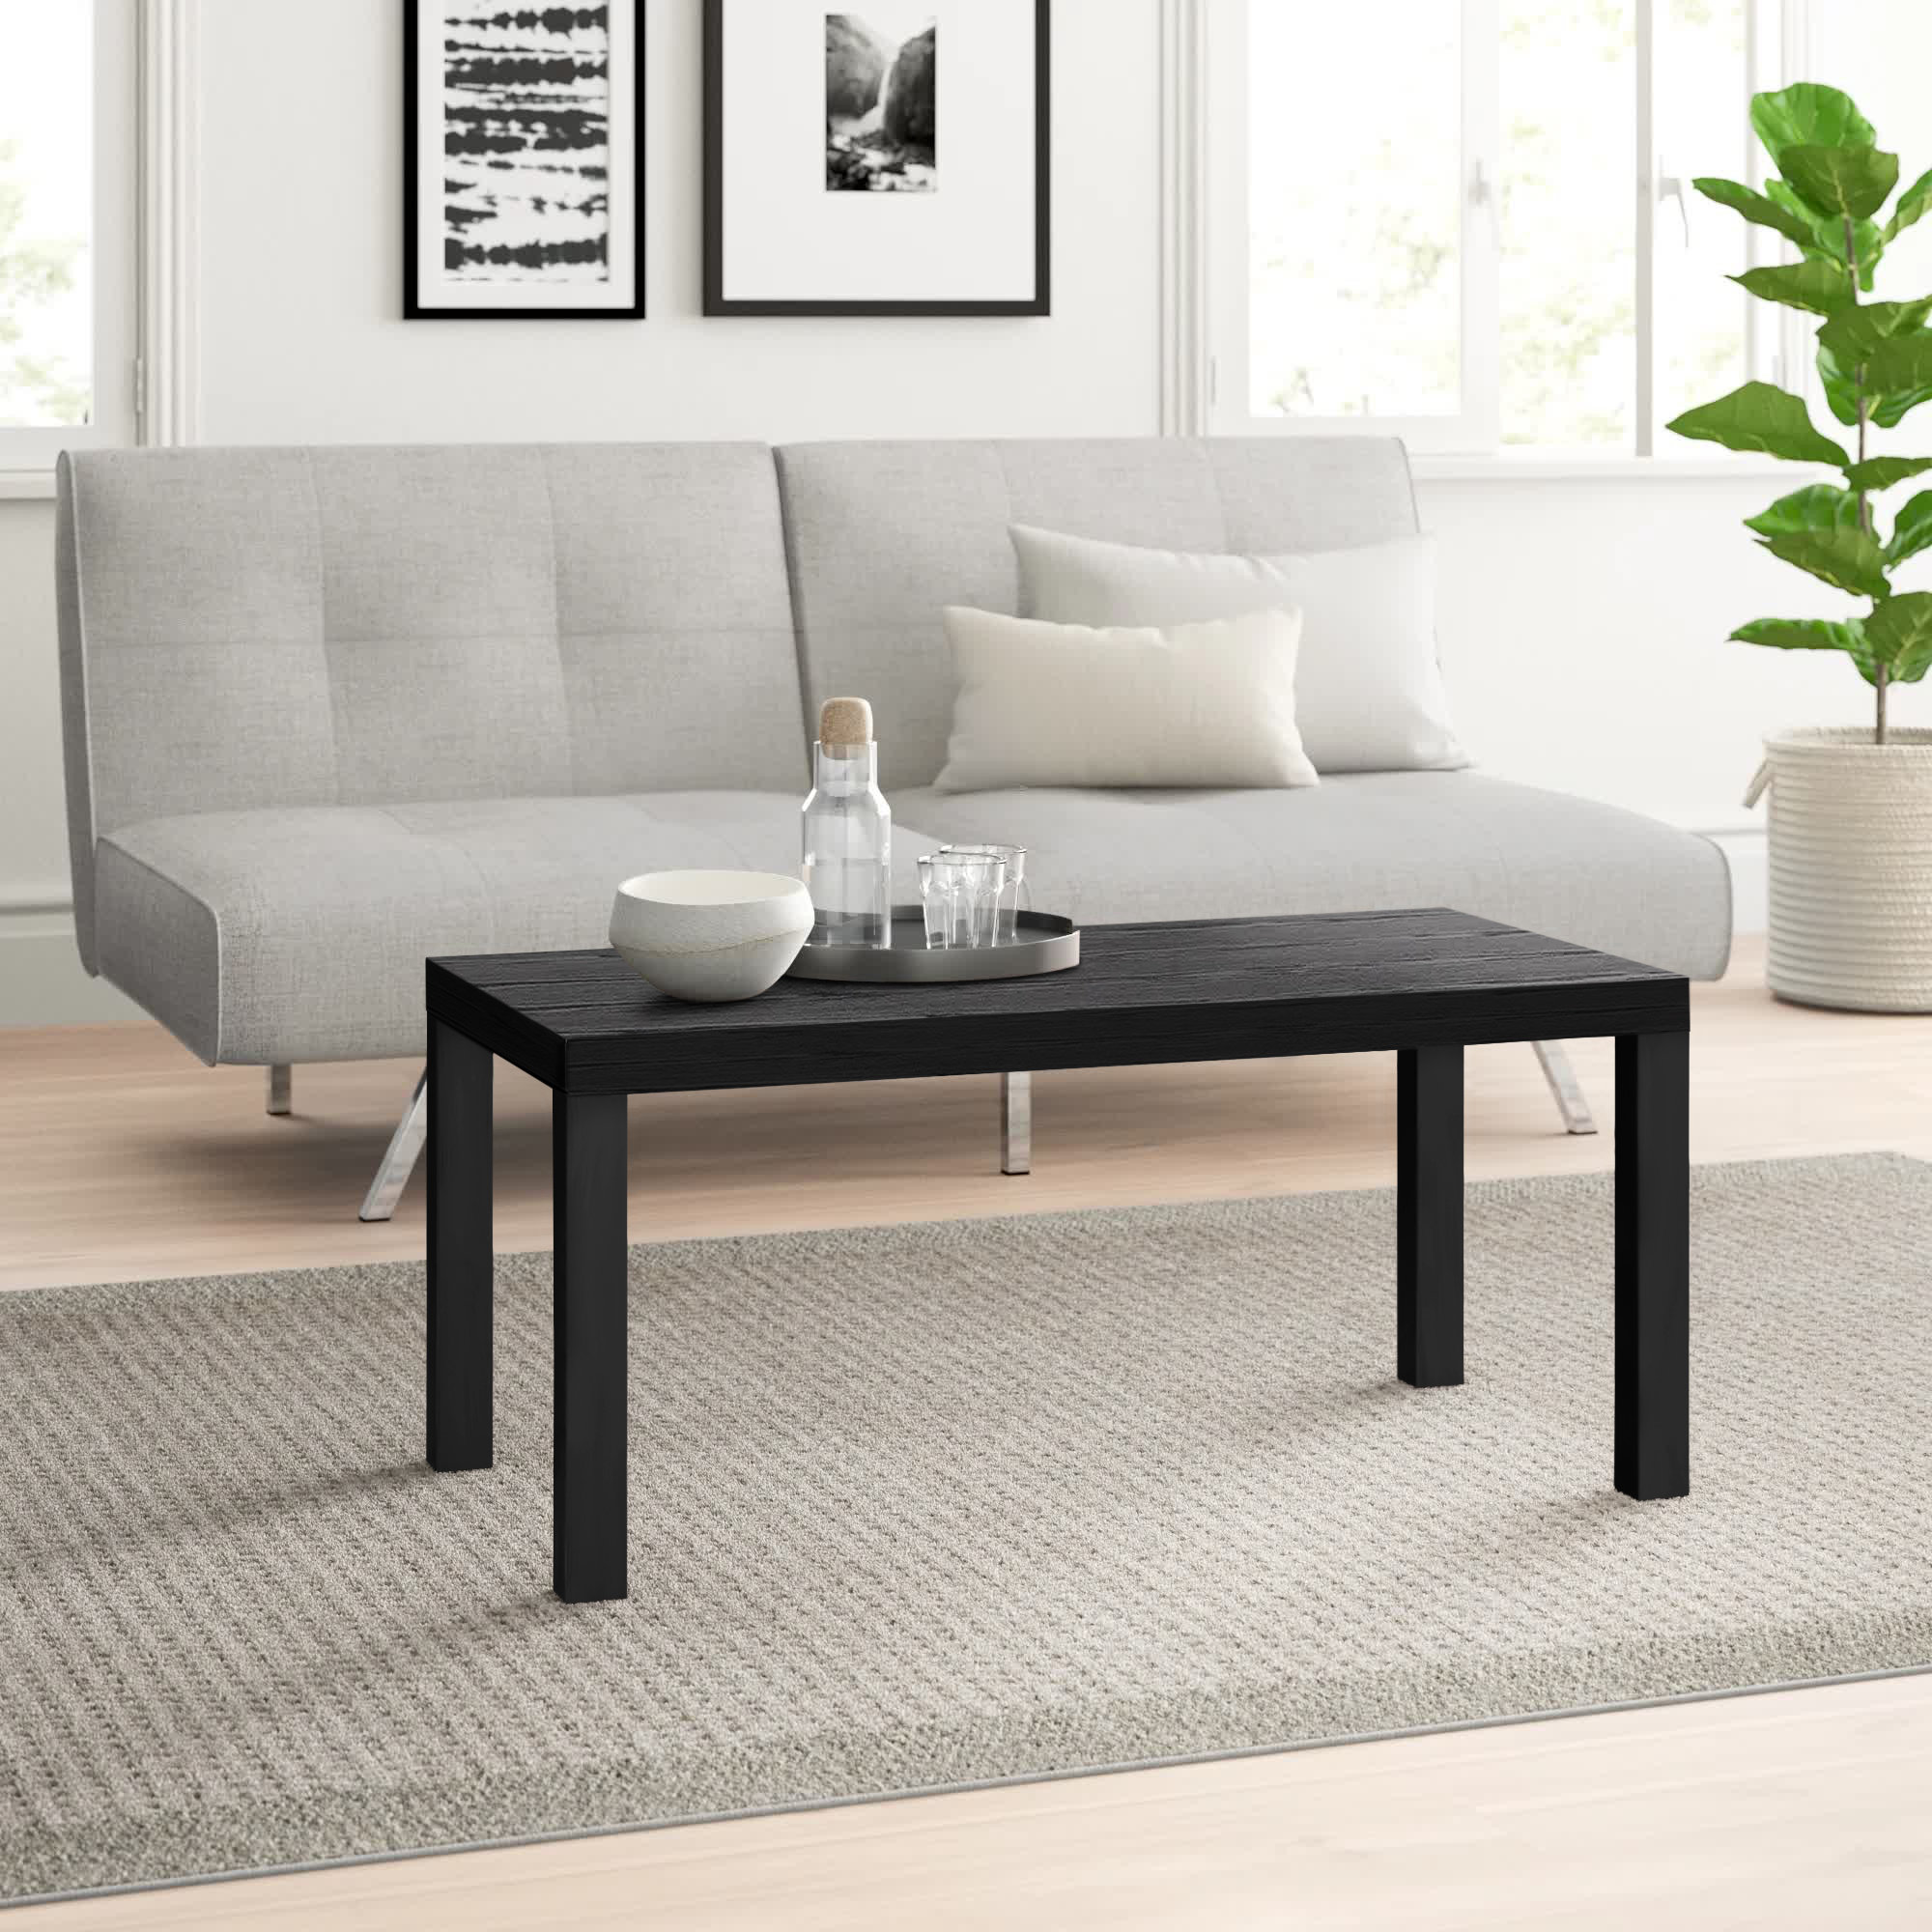 Legs Rectangle Coffee Tables You'll Love